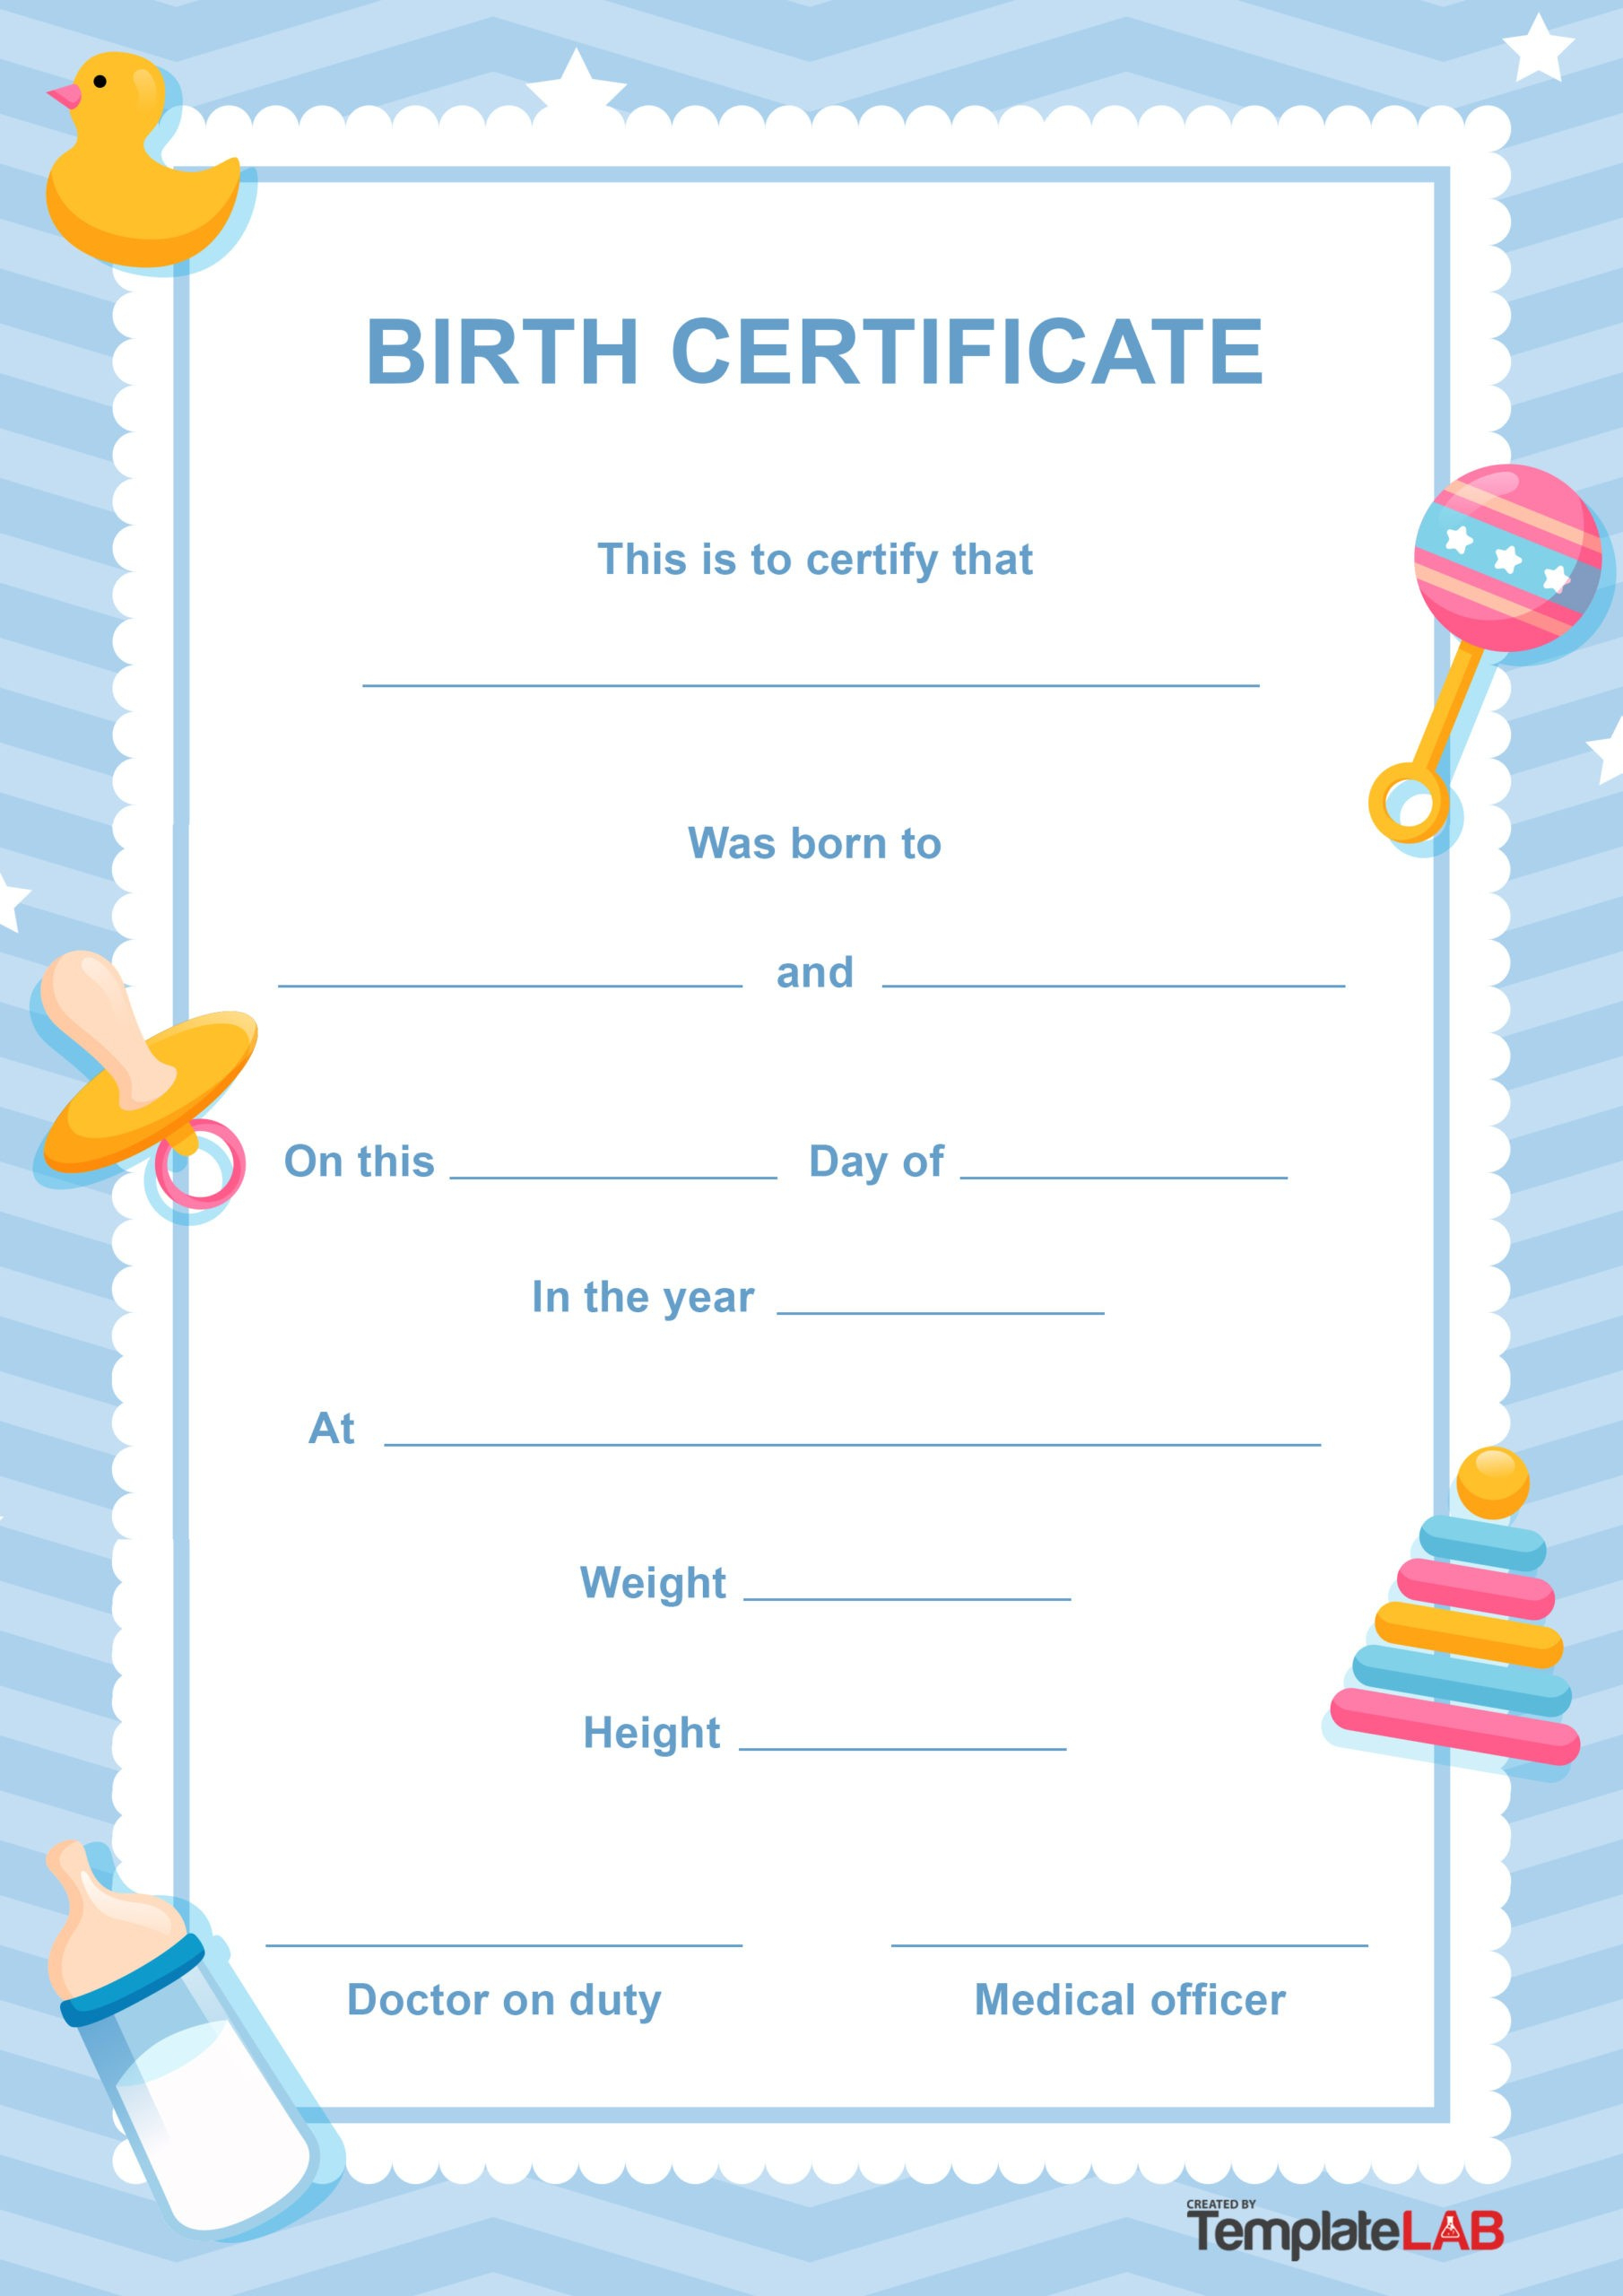 27 Birth Certificate Templates (Word, Ppt &amp; Pdf) ᐅ Templatelab with regard to Fresh Official Birth Certificate Template